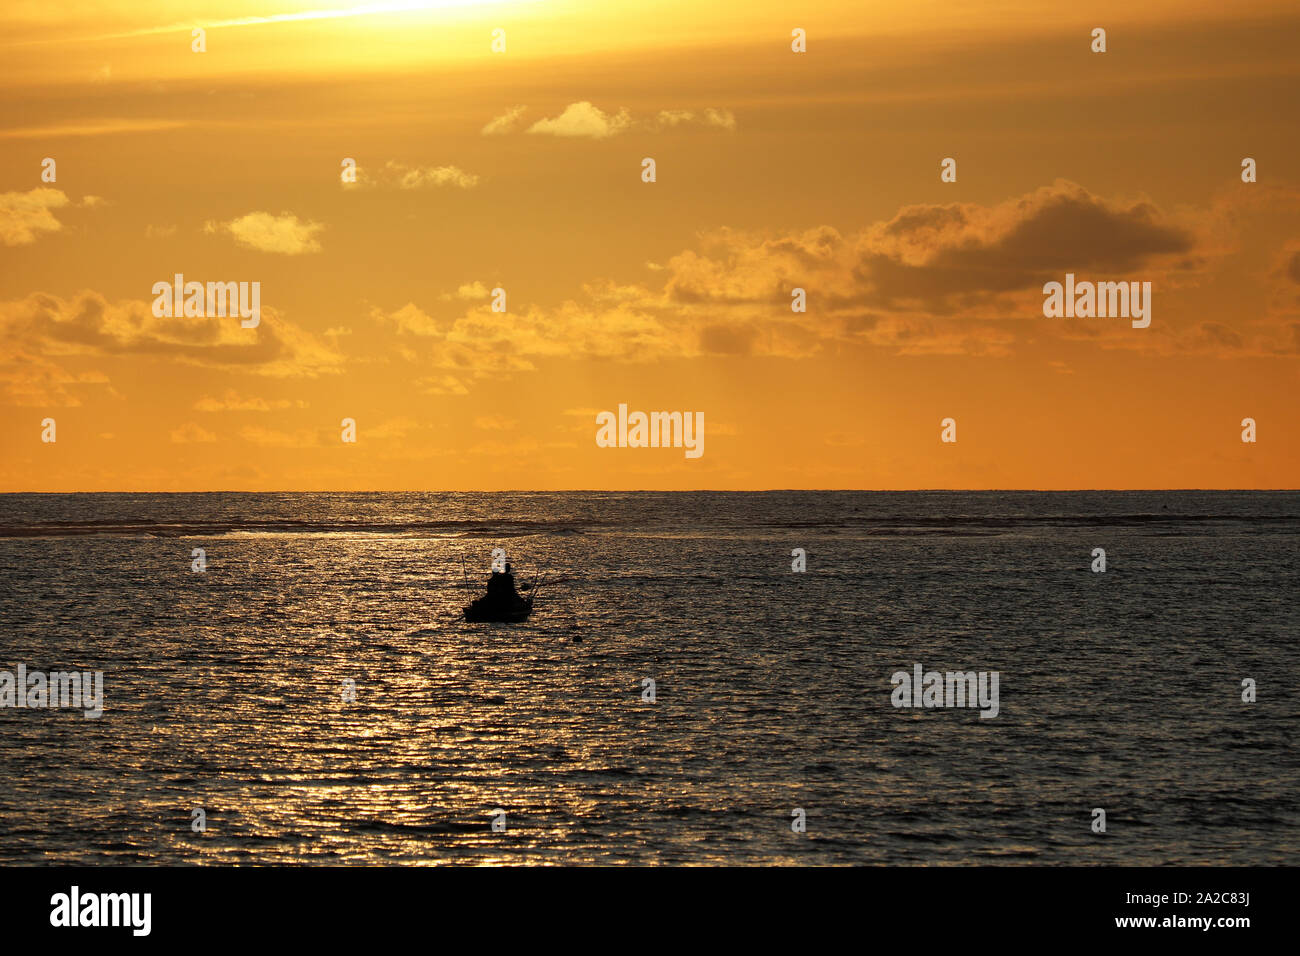 Sunset over the sea, black silhouette of a boat with people on horizon. Dramatic orange sky with clouds, concept of ship in distress, lost in ocean Stock Photo